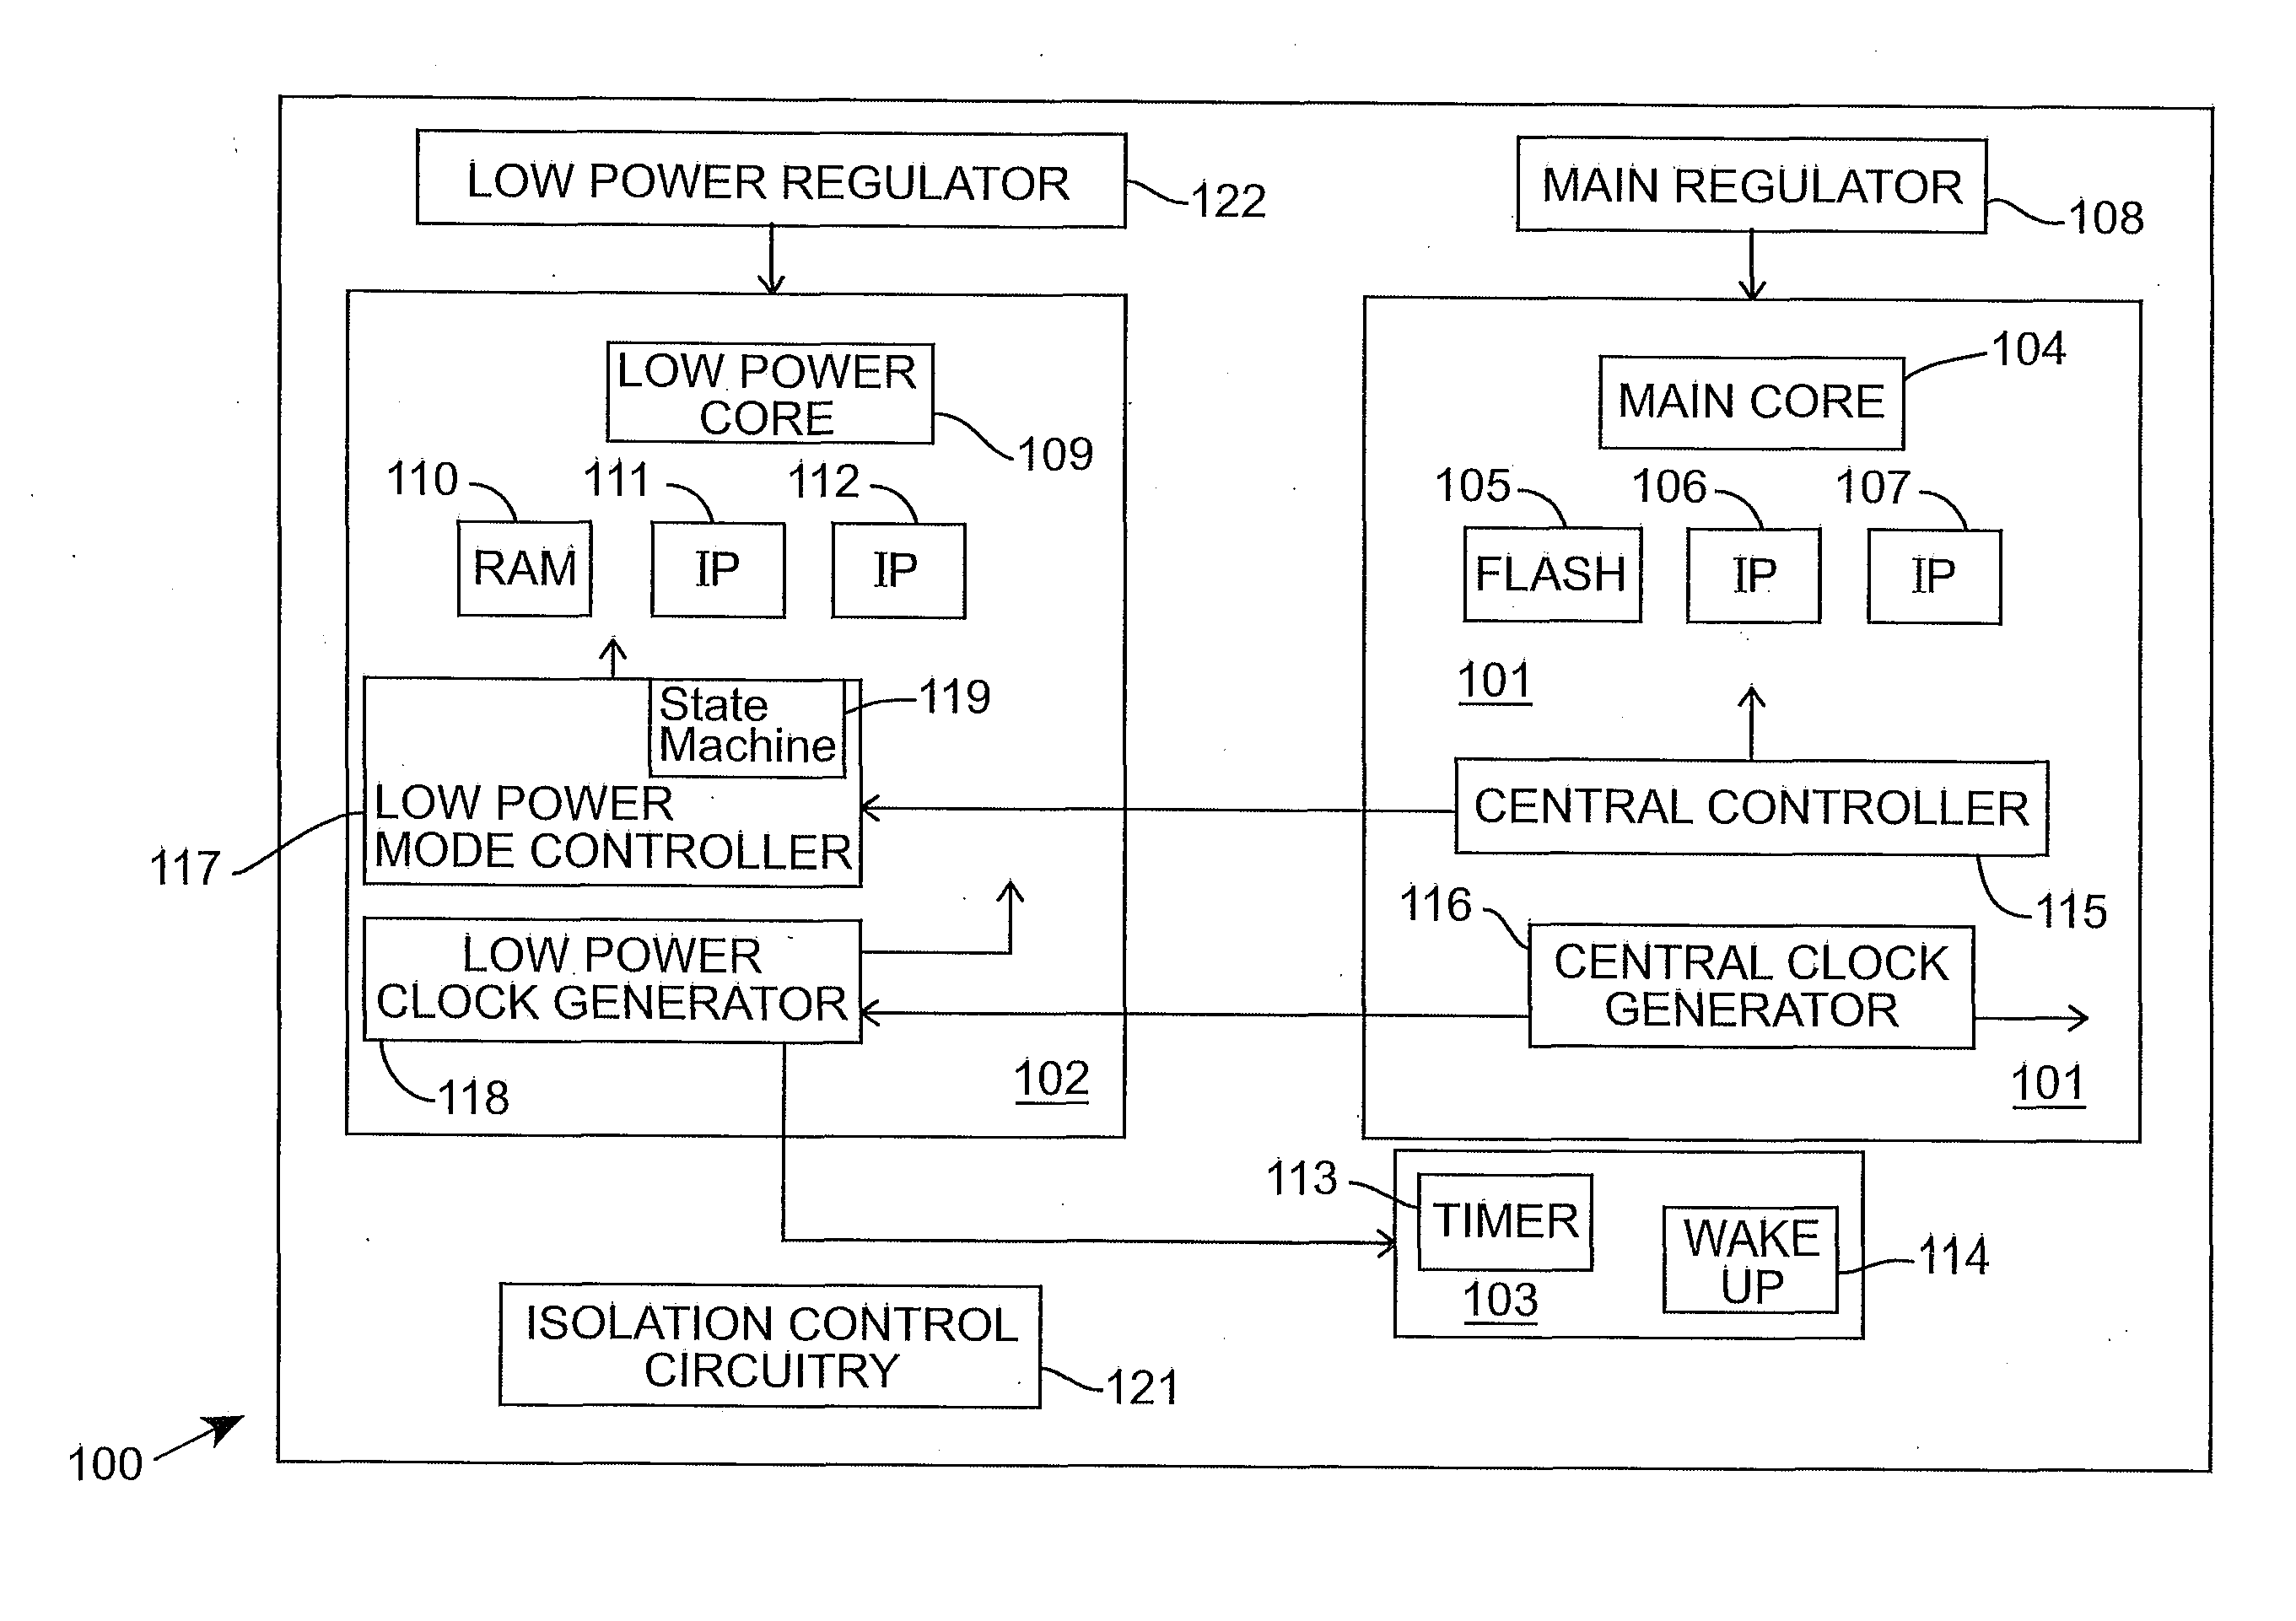 Integrated circuit power management